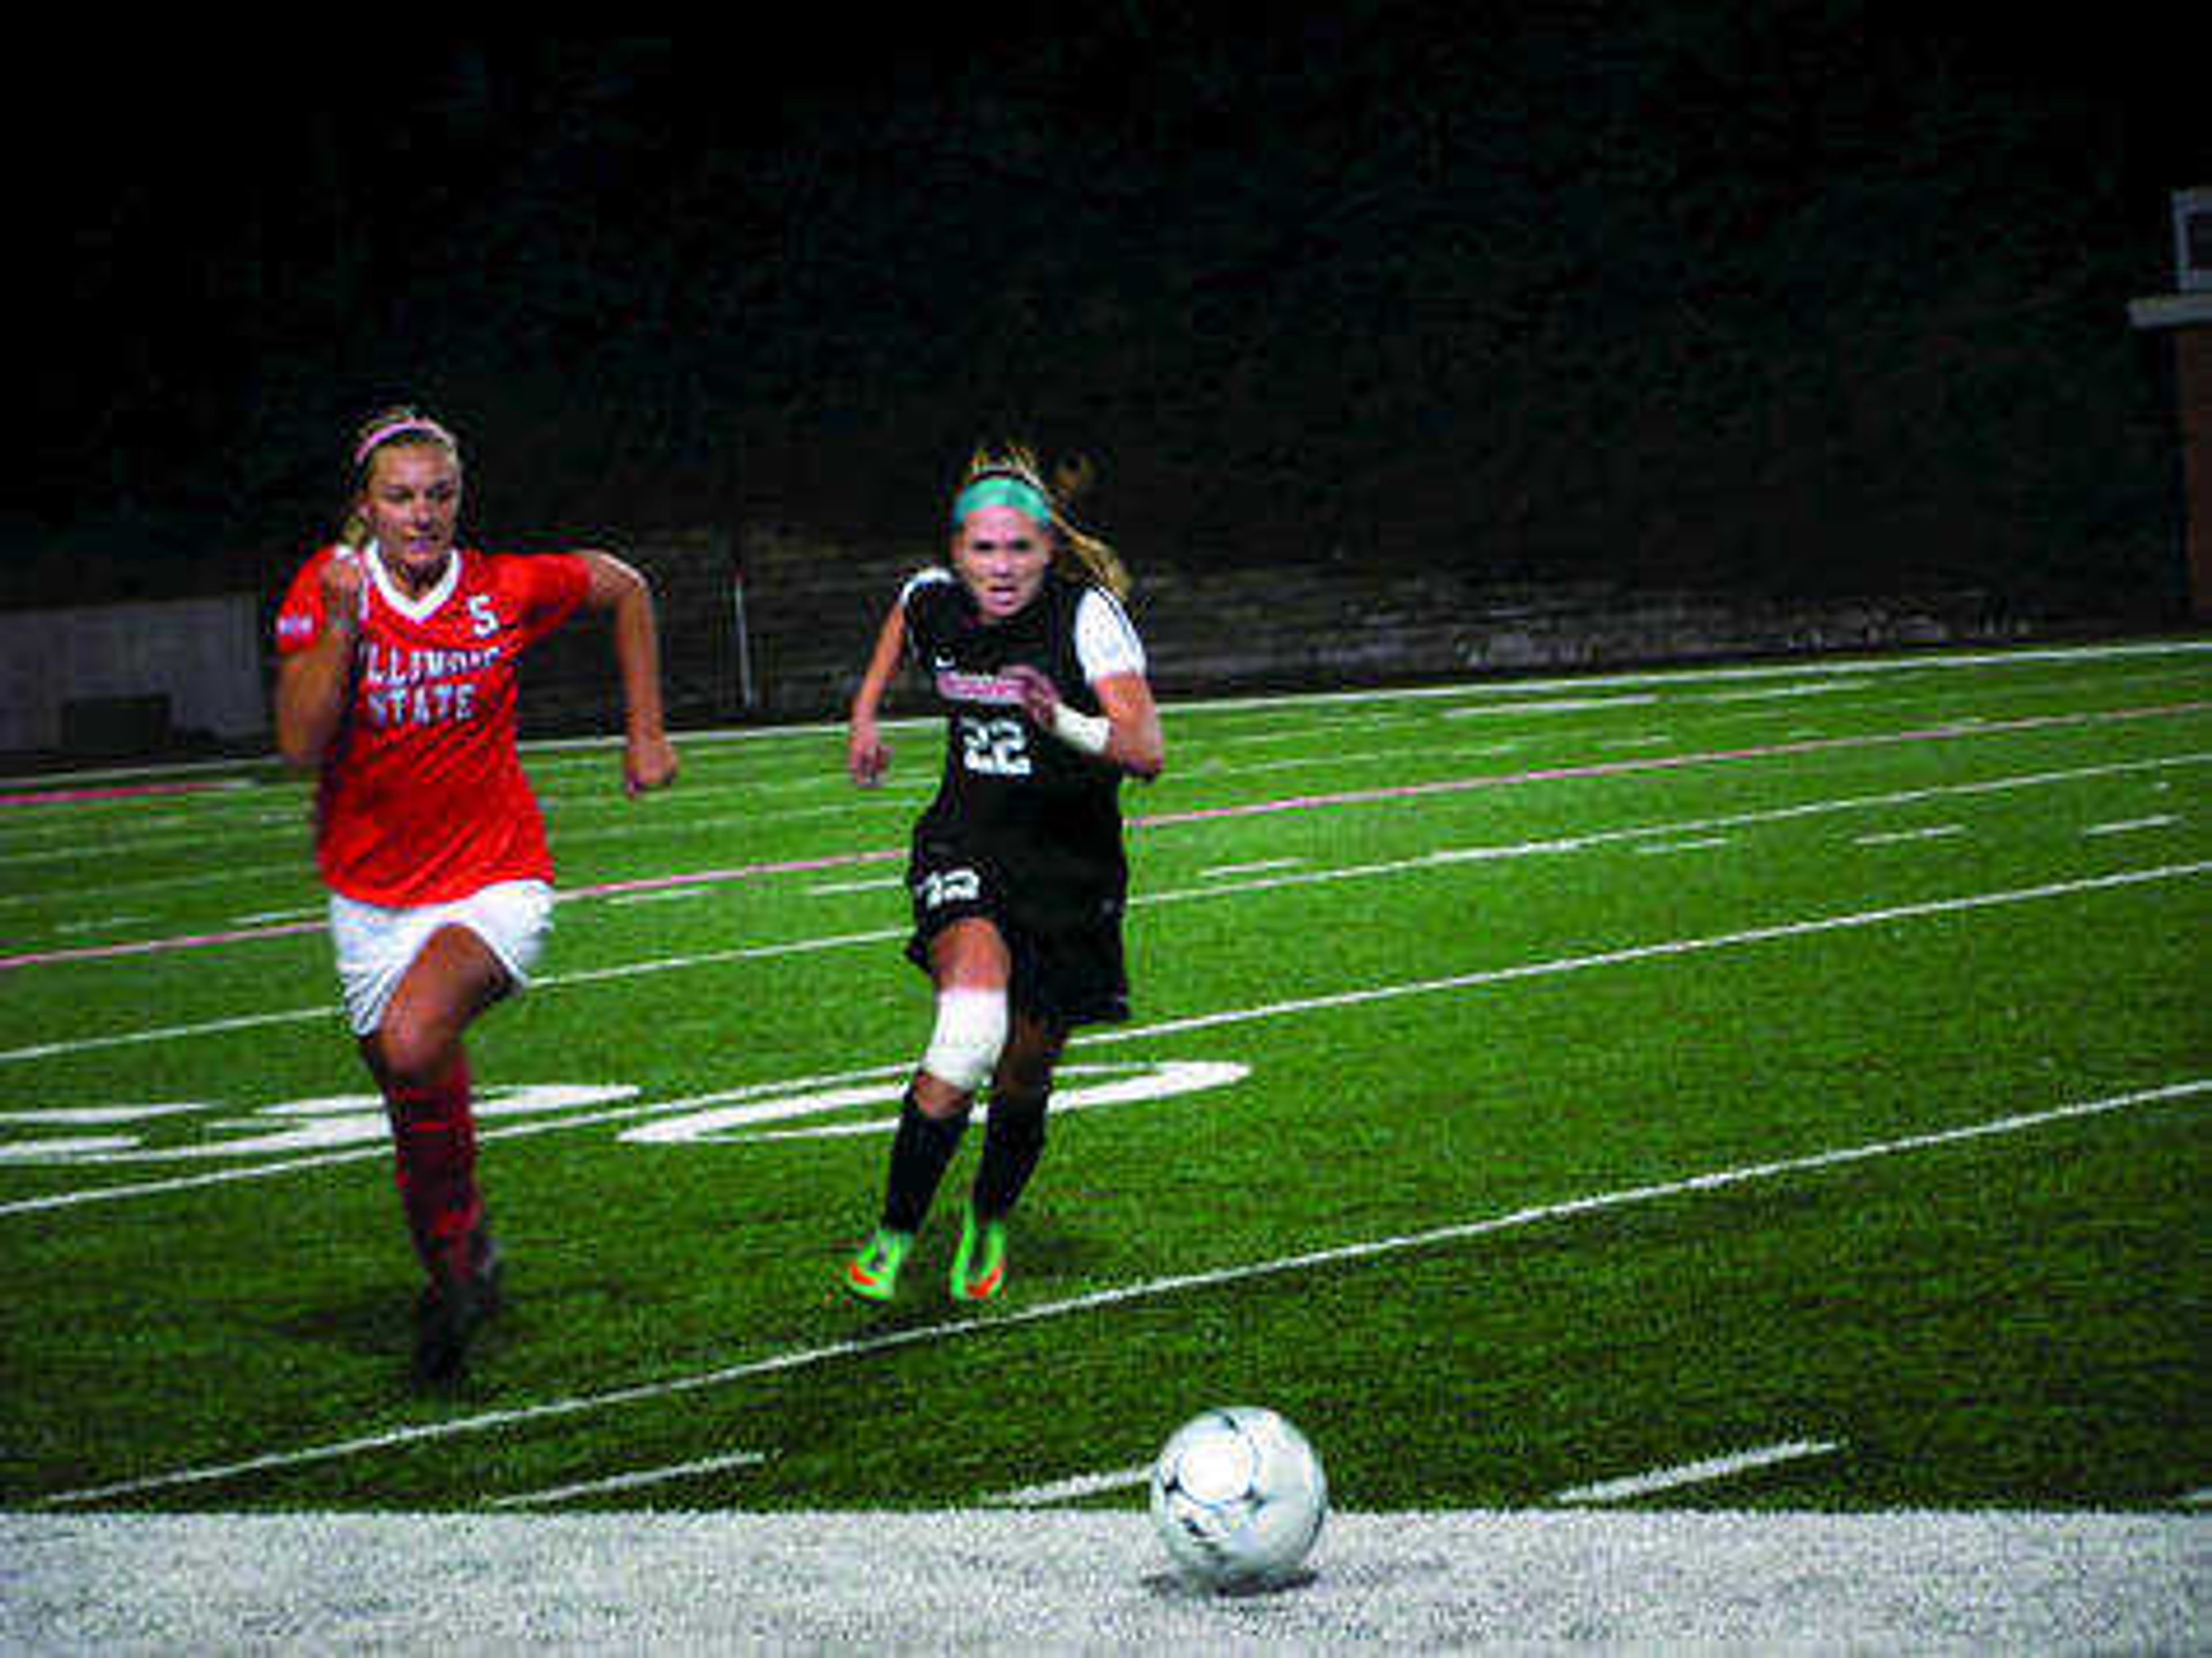 Sophomore midfielder/forward Natasha Minor (Right) running for the ball against an Illinois State player.